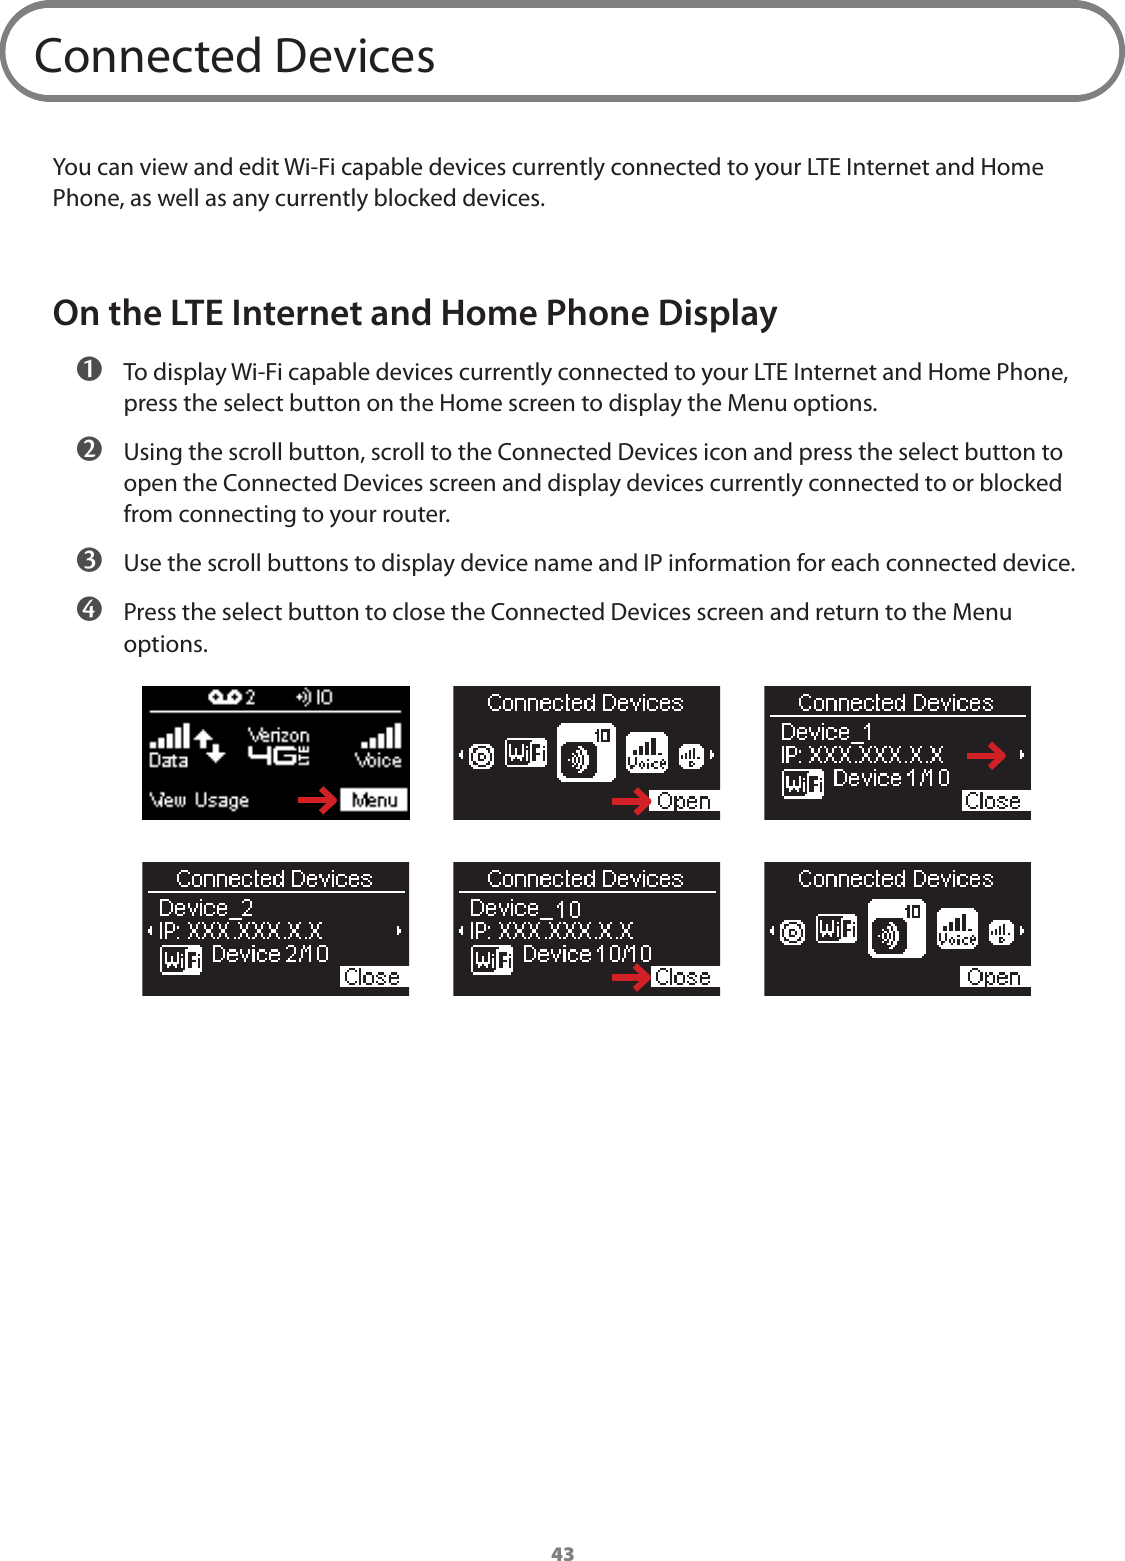 43Connected DevicesYou can view and edit Wi-Fi capable devices currently connected to your LTE Internet and Home Phone, as well as any currently blocked devices. On the LTE Internet and Home Phone Display ➊ To display Wi-Fi capable devices currently connected to your LTE Internet and Home Phone, press the select button on the Home screen to display the Menu options. ➋ Using the scroll button, scroll to the Connected Devices icon and press the select button to open the Connected Devices screen and display devices currently connected to or blocked from connecting to your router. ➌ Use the scroll buttons to display device name and IP information for each connected device. ➍ Press the select button to close the Connected Devices screen and return to the Menu options.